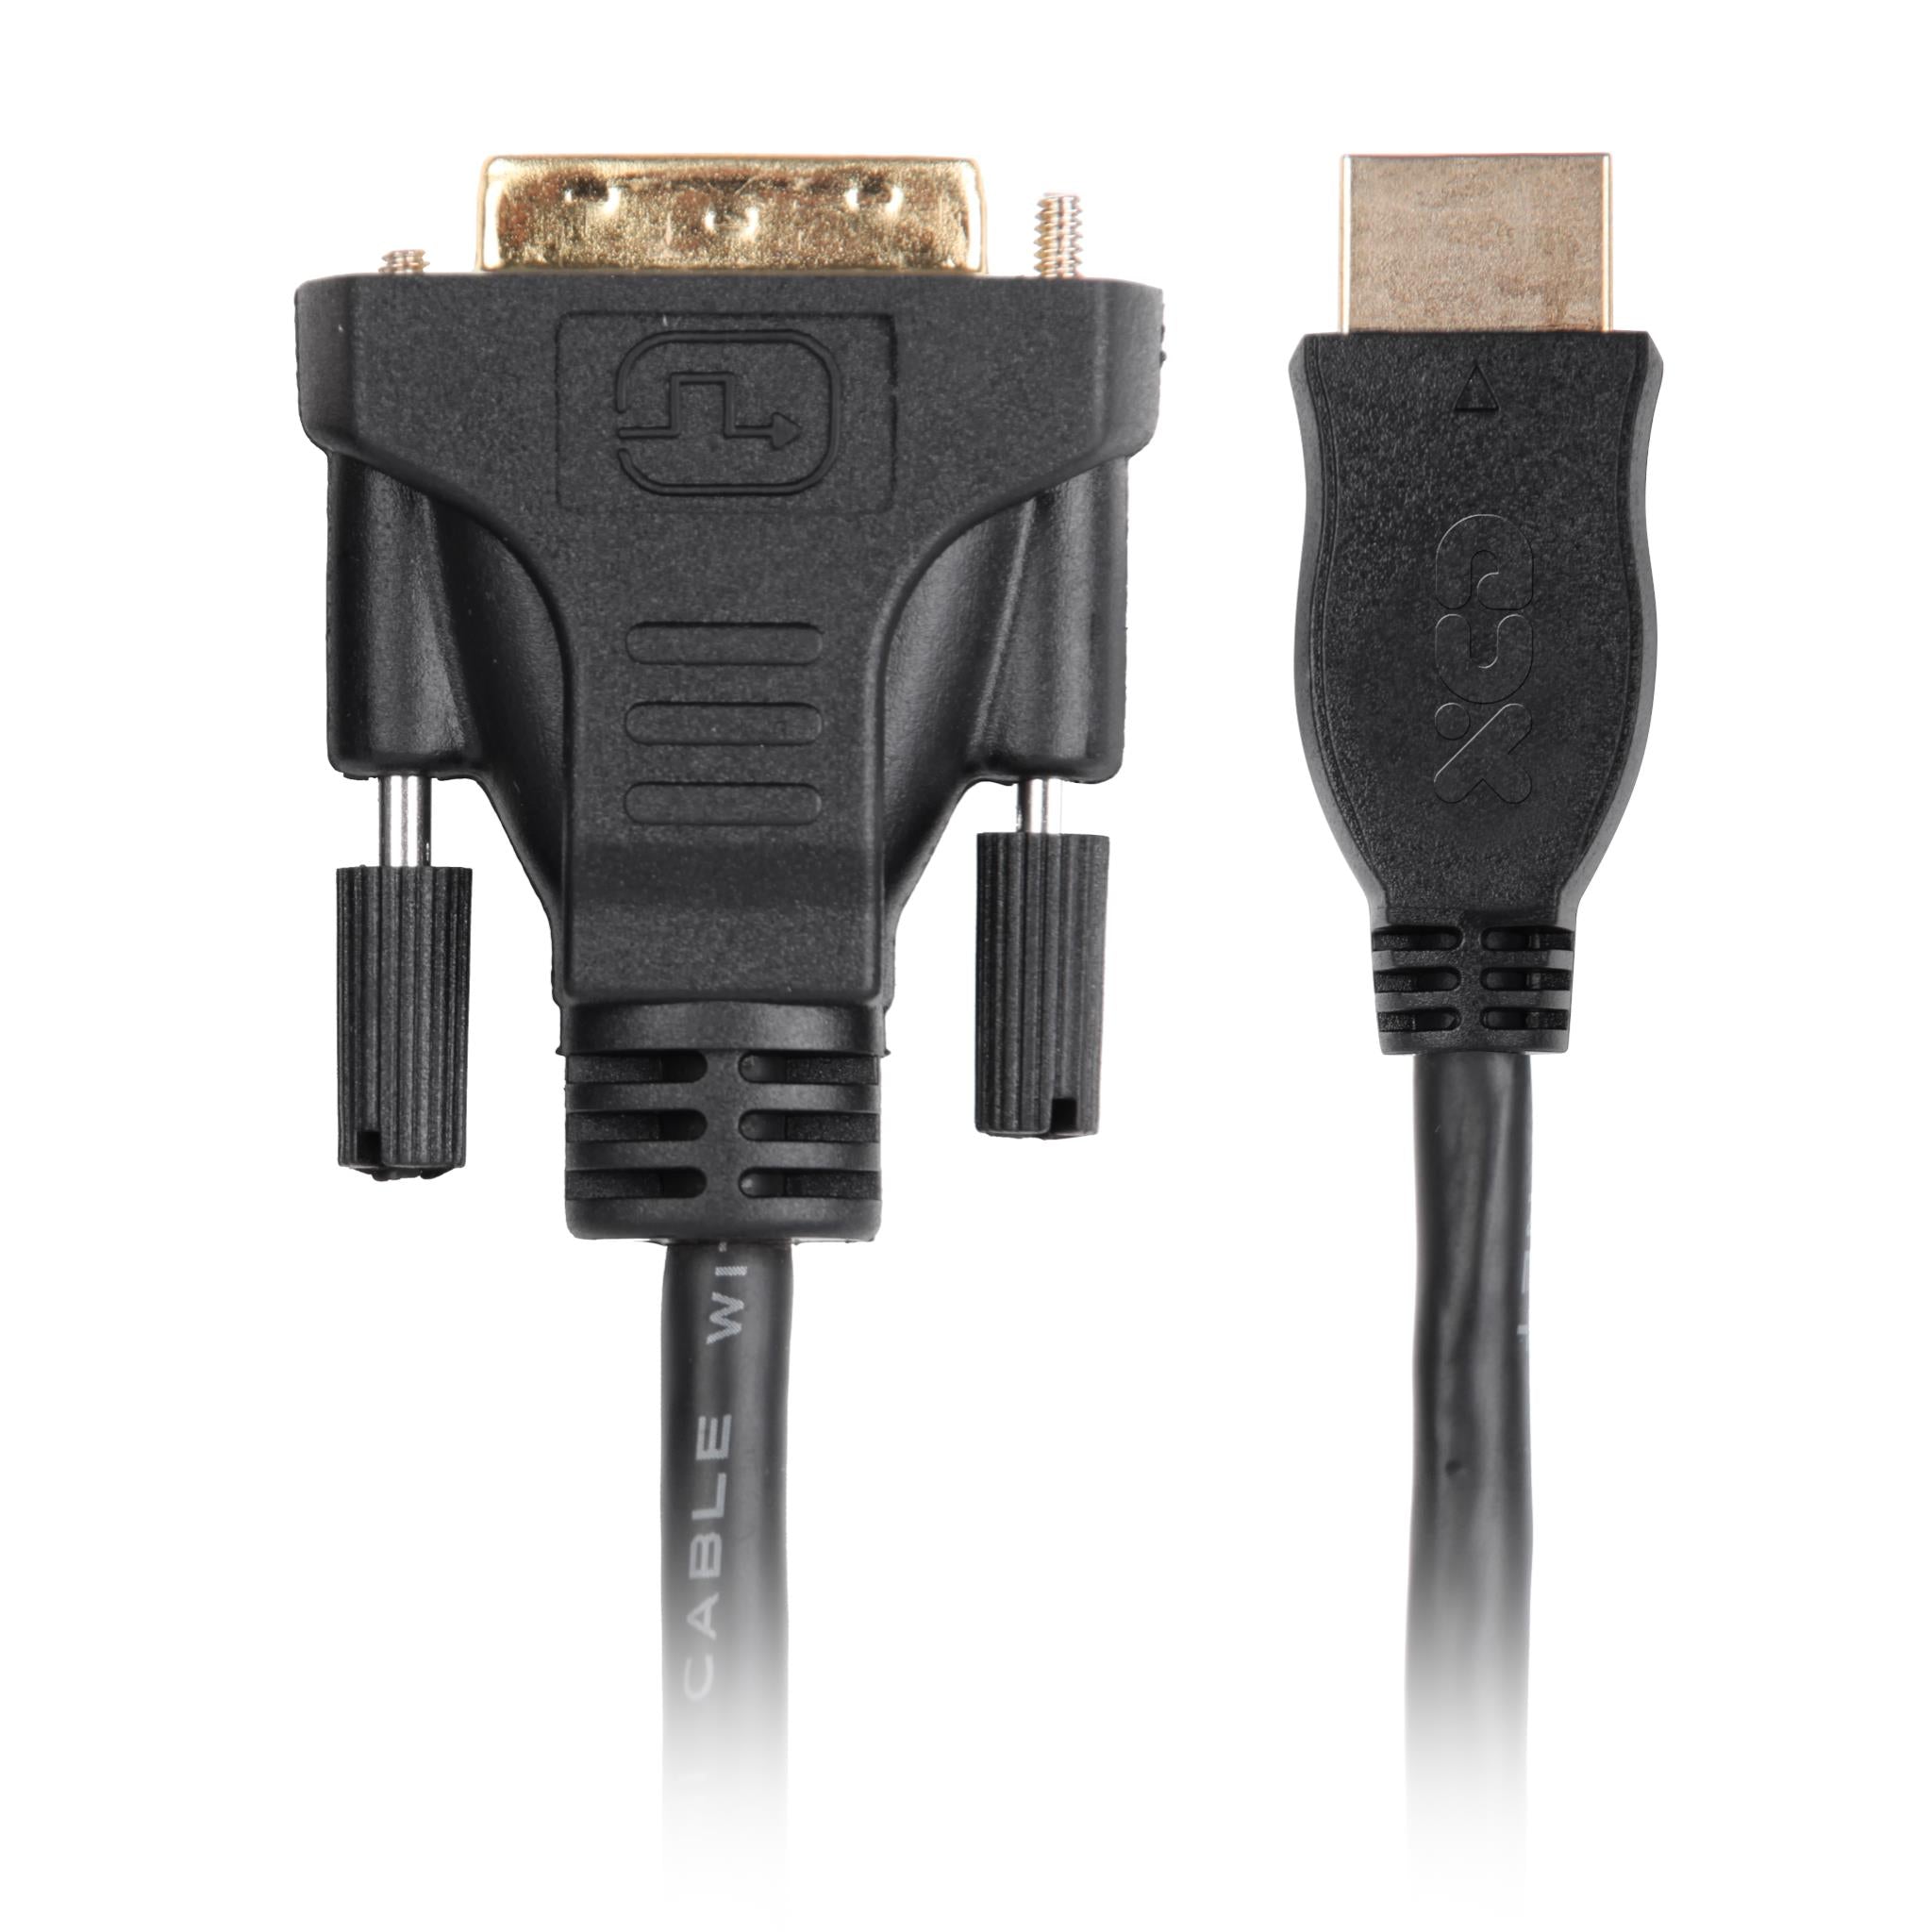 xcd essentials hdmi to dvi adapter cable (1m)